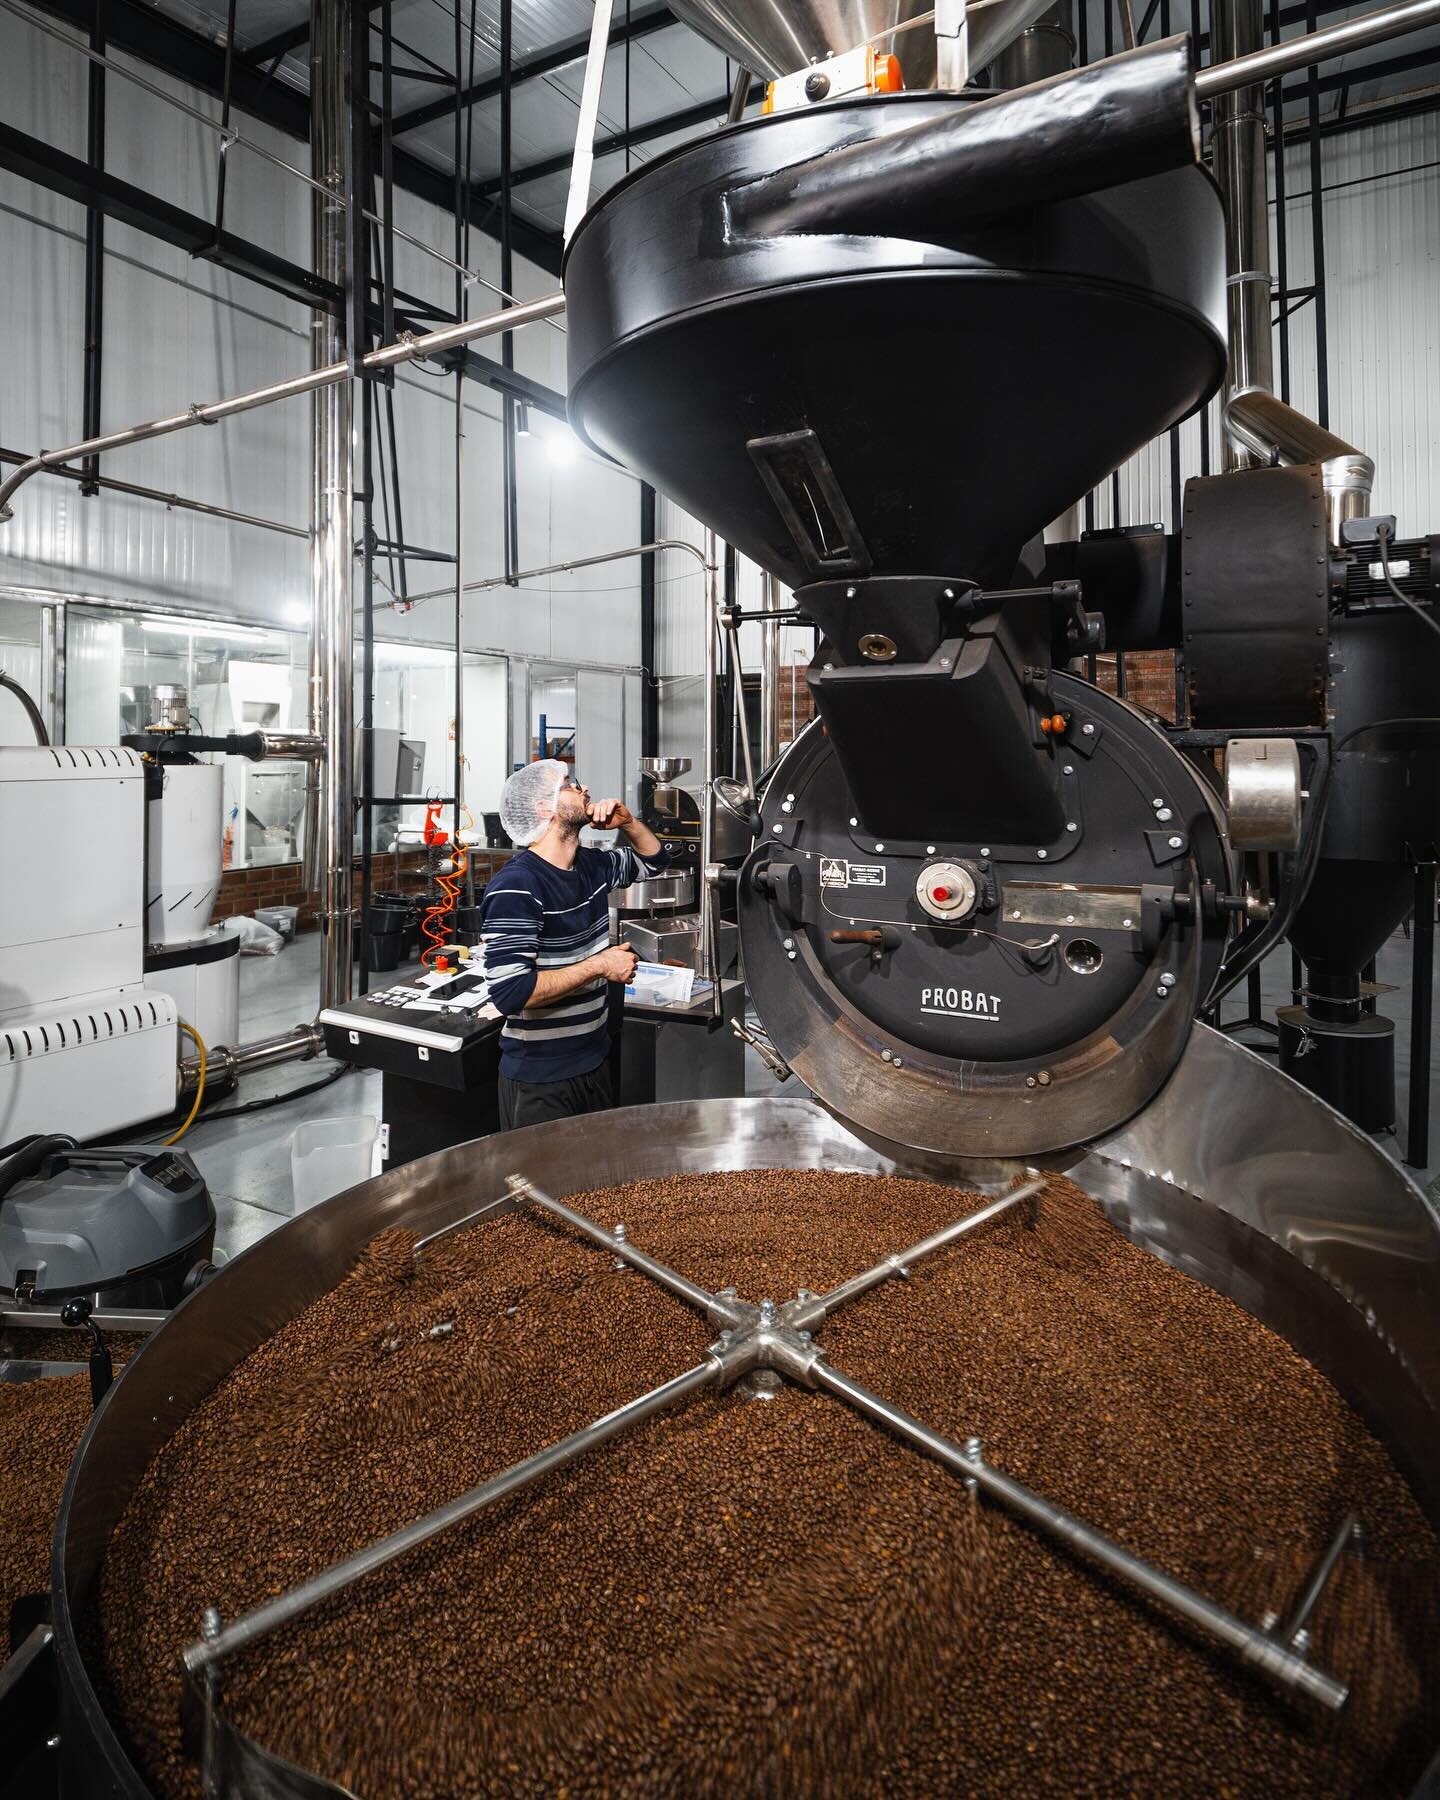 What are you roasting on today? Here&rsquo;s one of our roasters in action! Thanks @probatroasters @probatusa . .
.
.
.
.
#coffee #torchcoffee #specialtycoffee #coffeegram #torch #coffeeholic #coffeelover #roaster #coffeeroaster #roast #roasting #roa